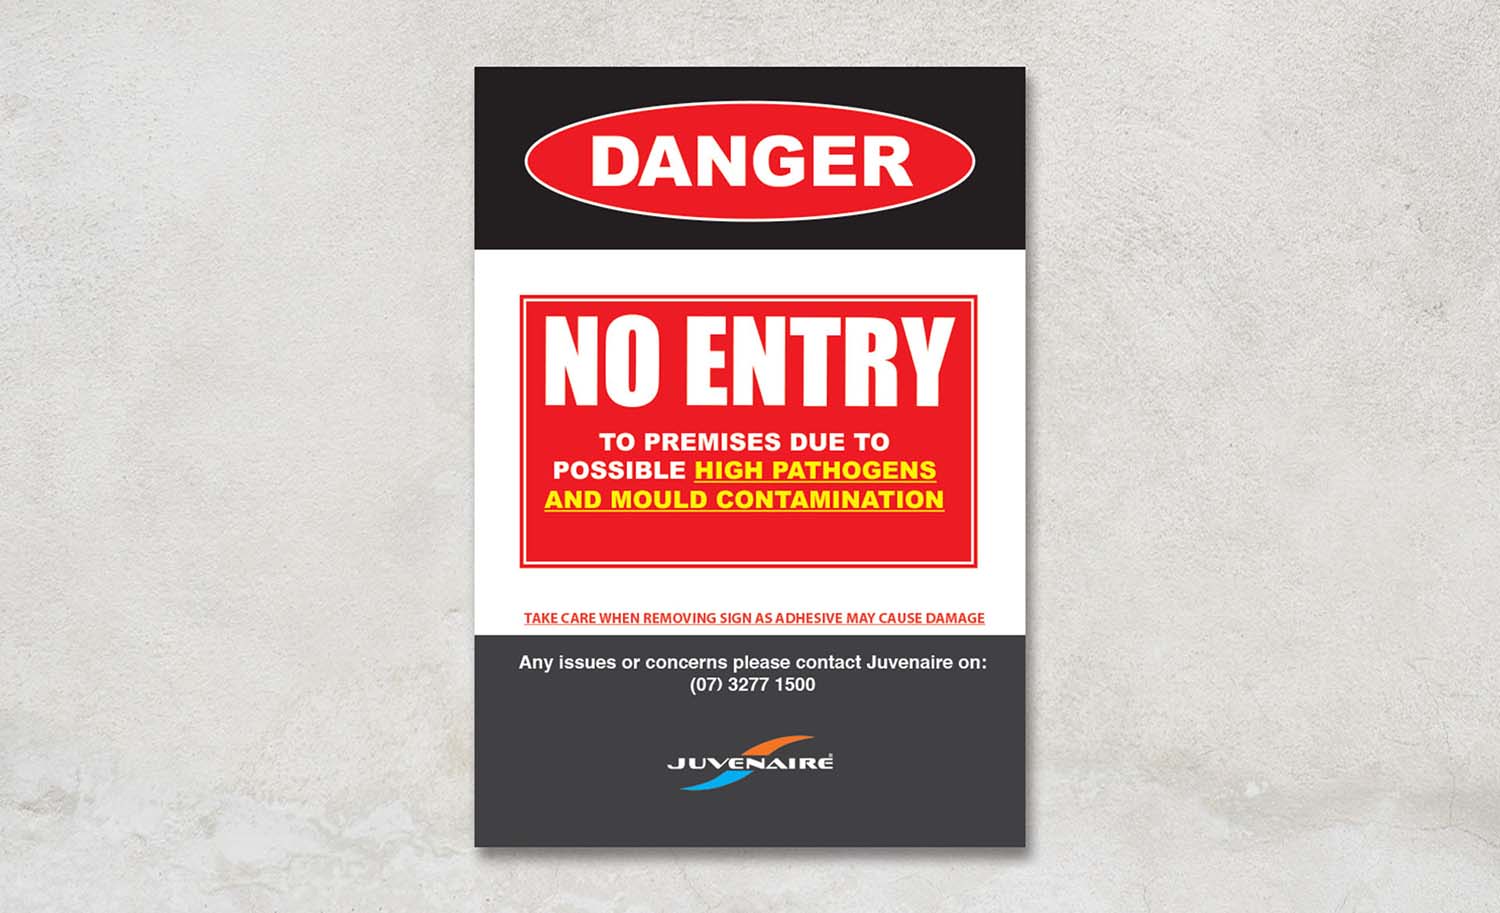 A warning sign reading: Danger no entry to premises due to possible high pathogens and mould contamination.